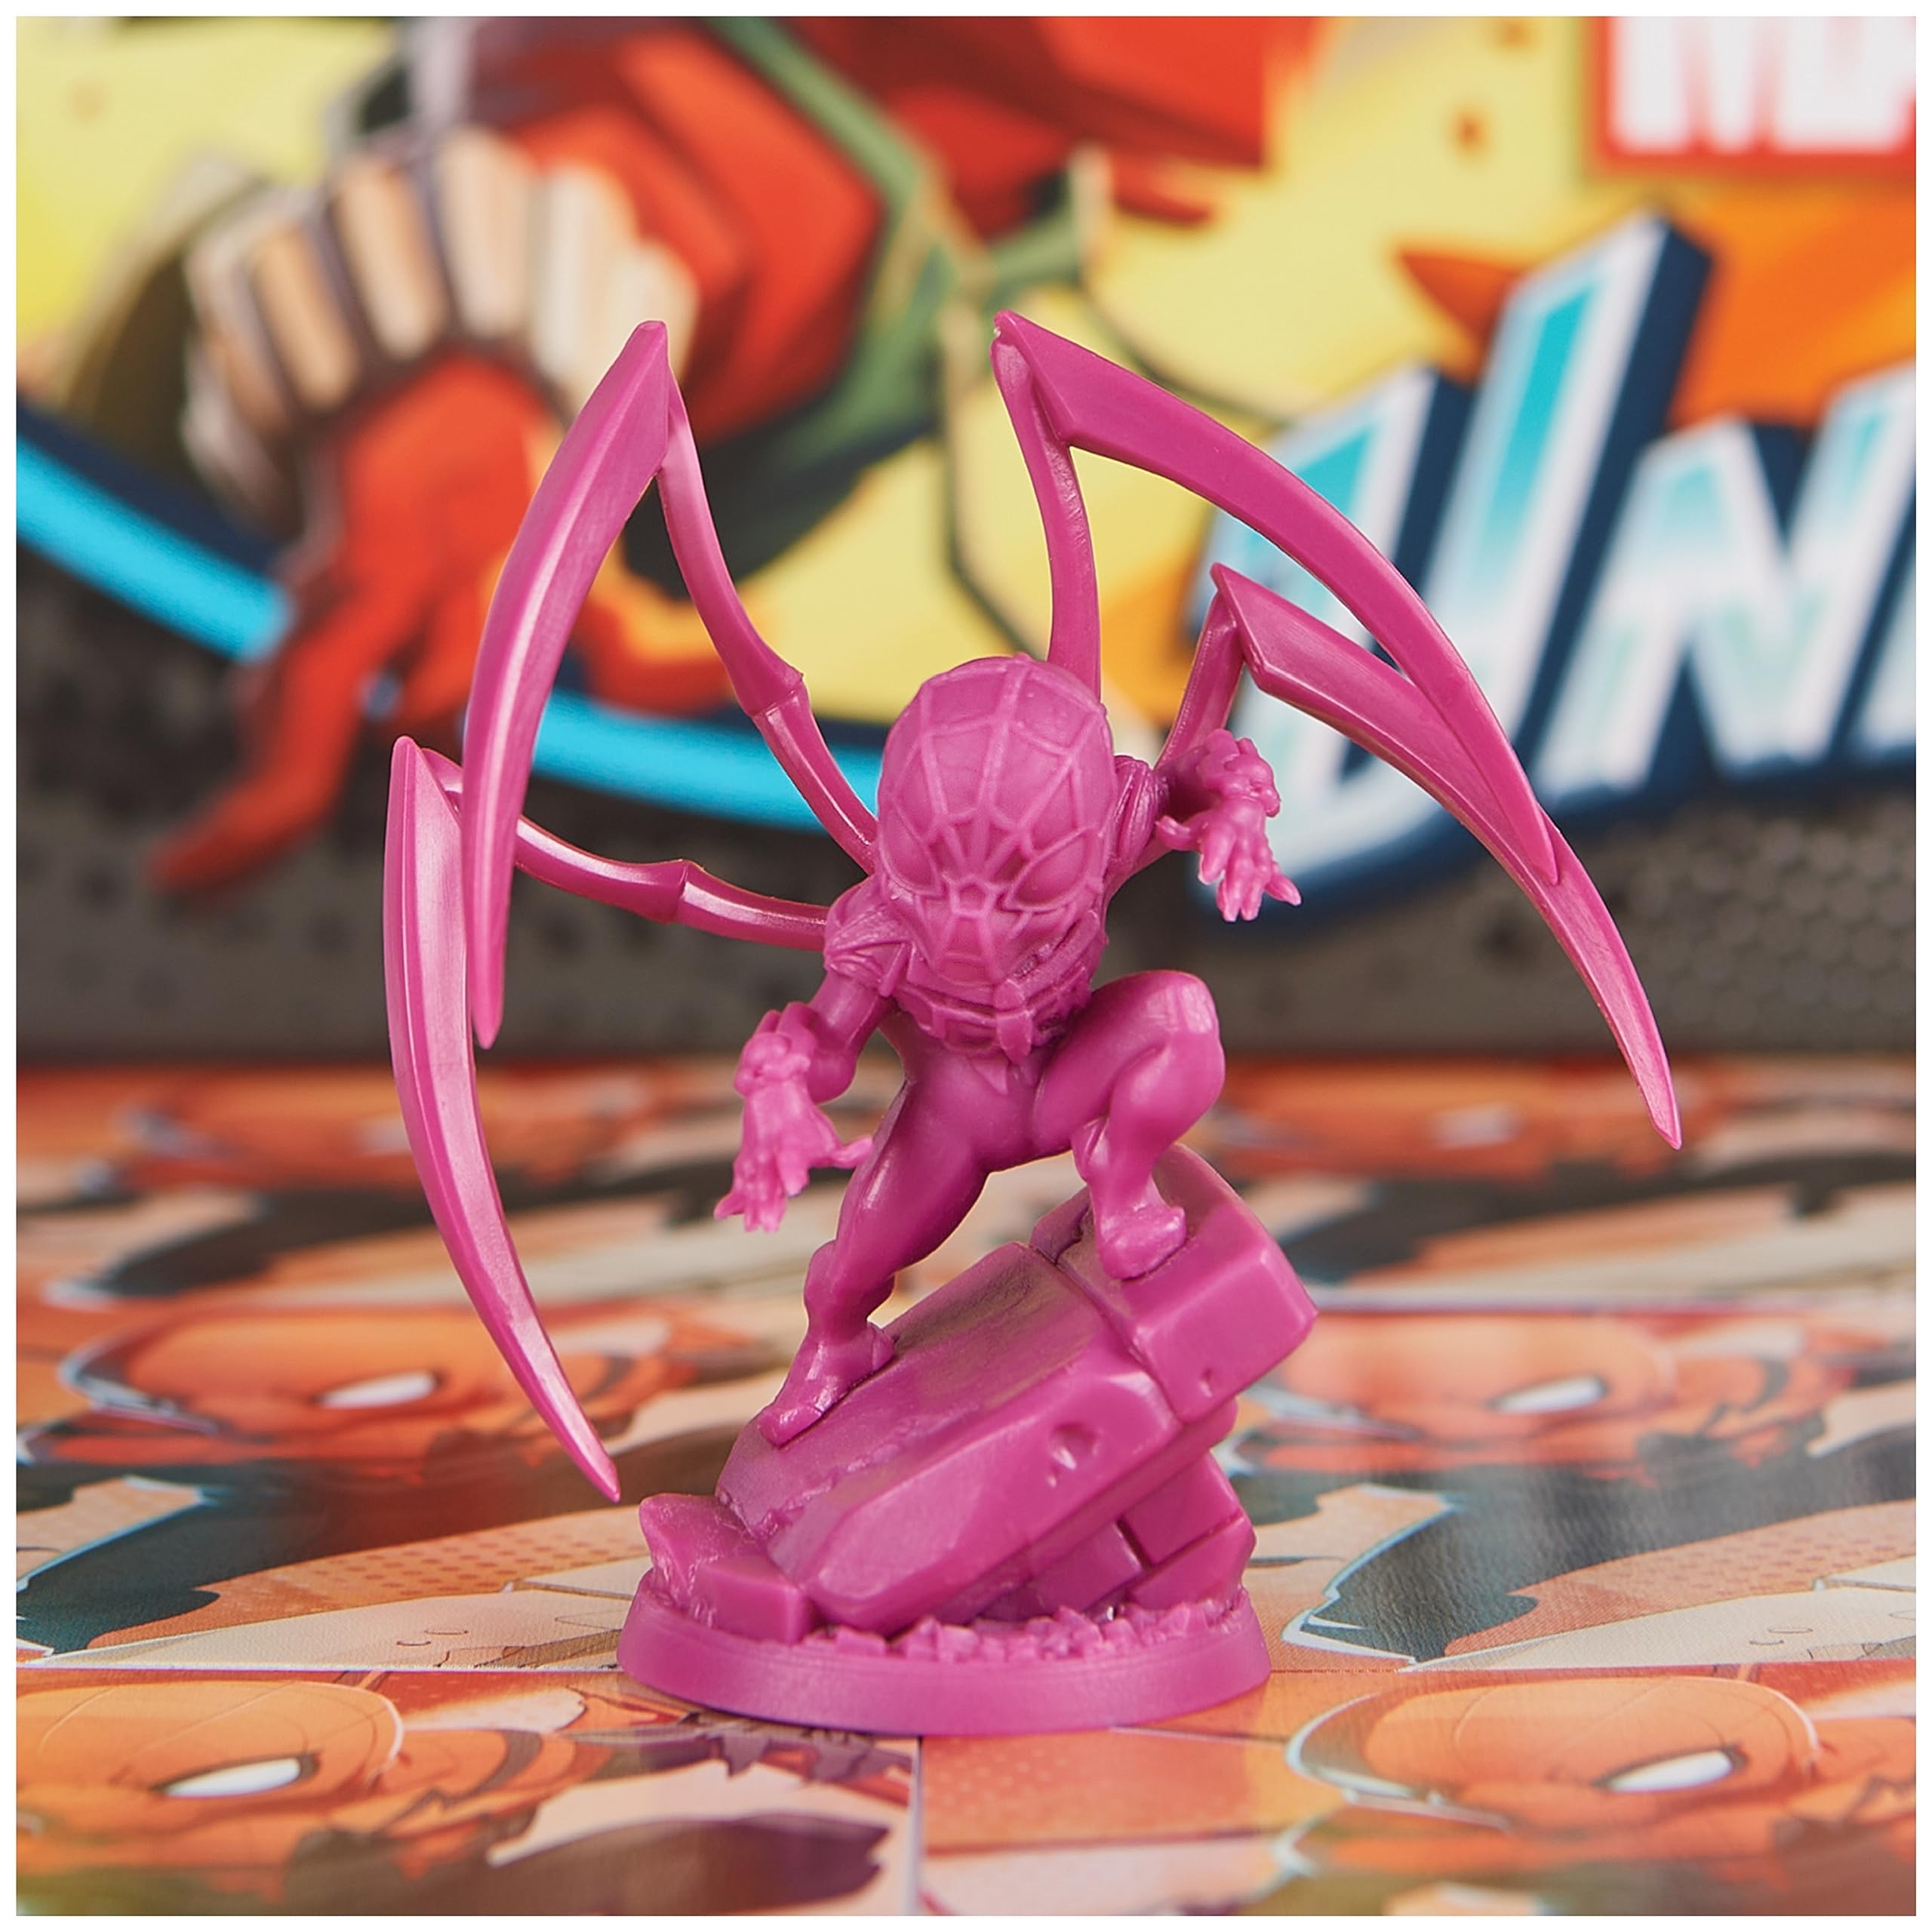 Marvel United Spider-Geddon Strategy Board Game by CMON & Spin Master Games | Spider Man Adult Toy | Spiderman Toy for Adults & Kids Ages 14 and up